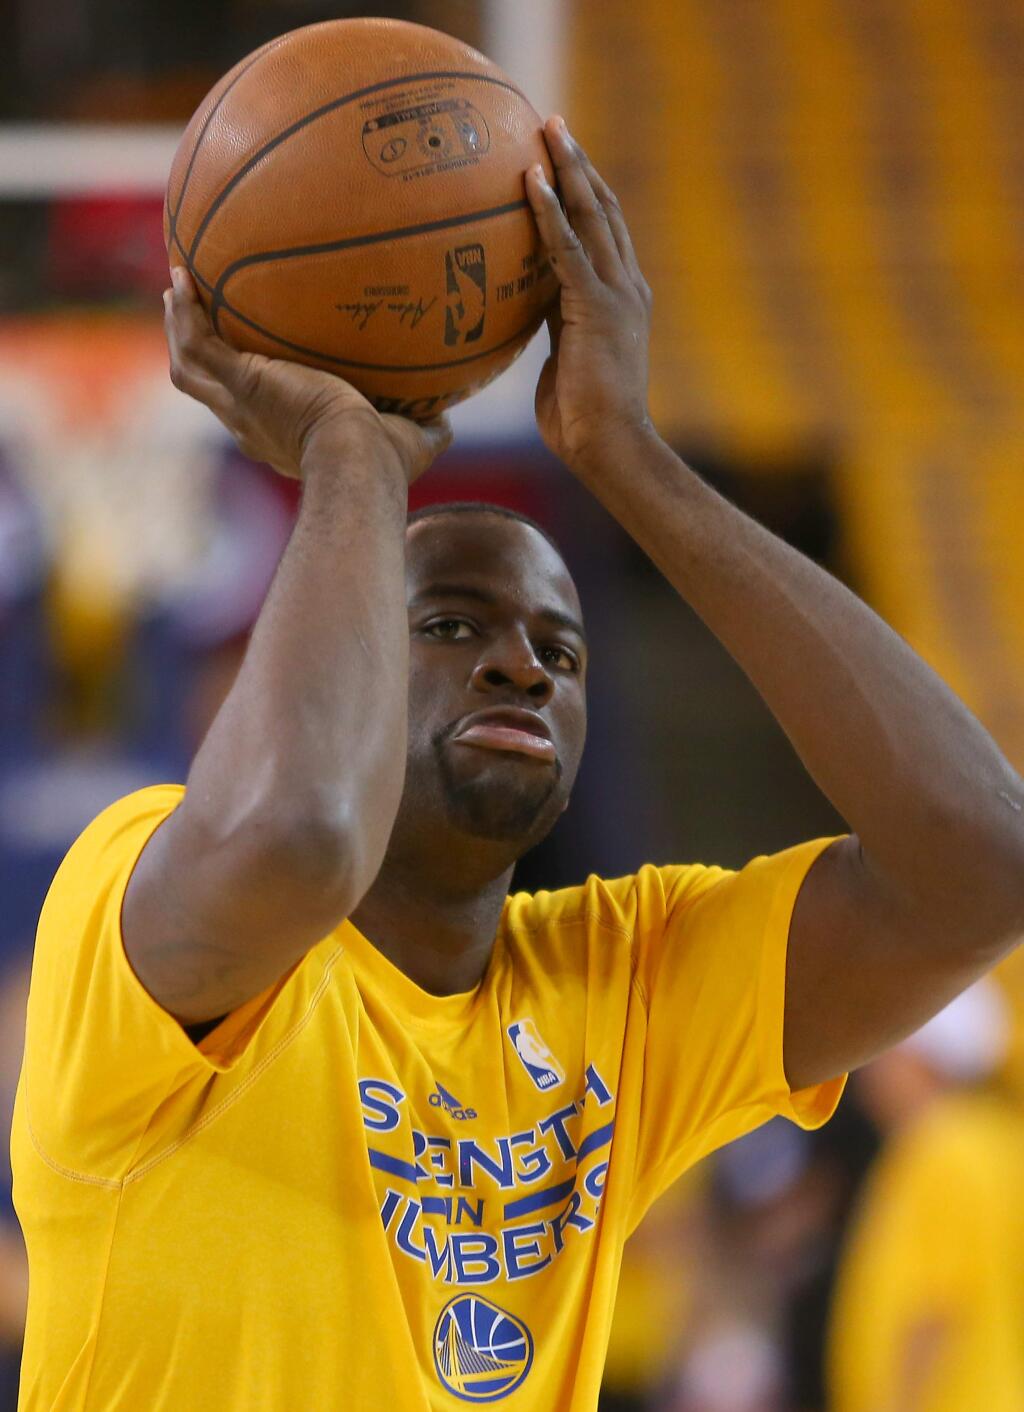 Golden State Warriors forward Draymond Green shoots from the free throw line during his shootaround prior to Game 2 of the NBA Playoffs Western Conference Finals at Oracle Arena, in Oakland on Thursday, May 21, 2015. (Christopher Chung/ The Press Democrat)